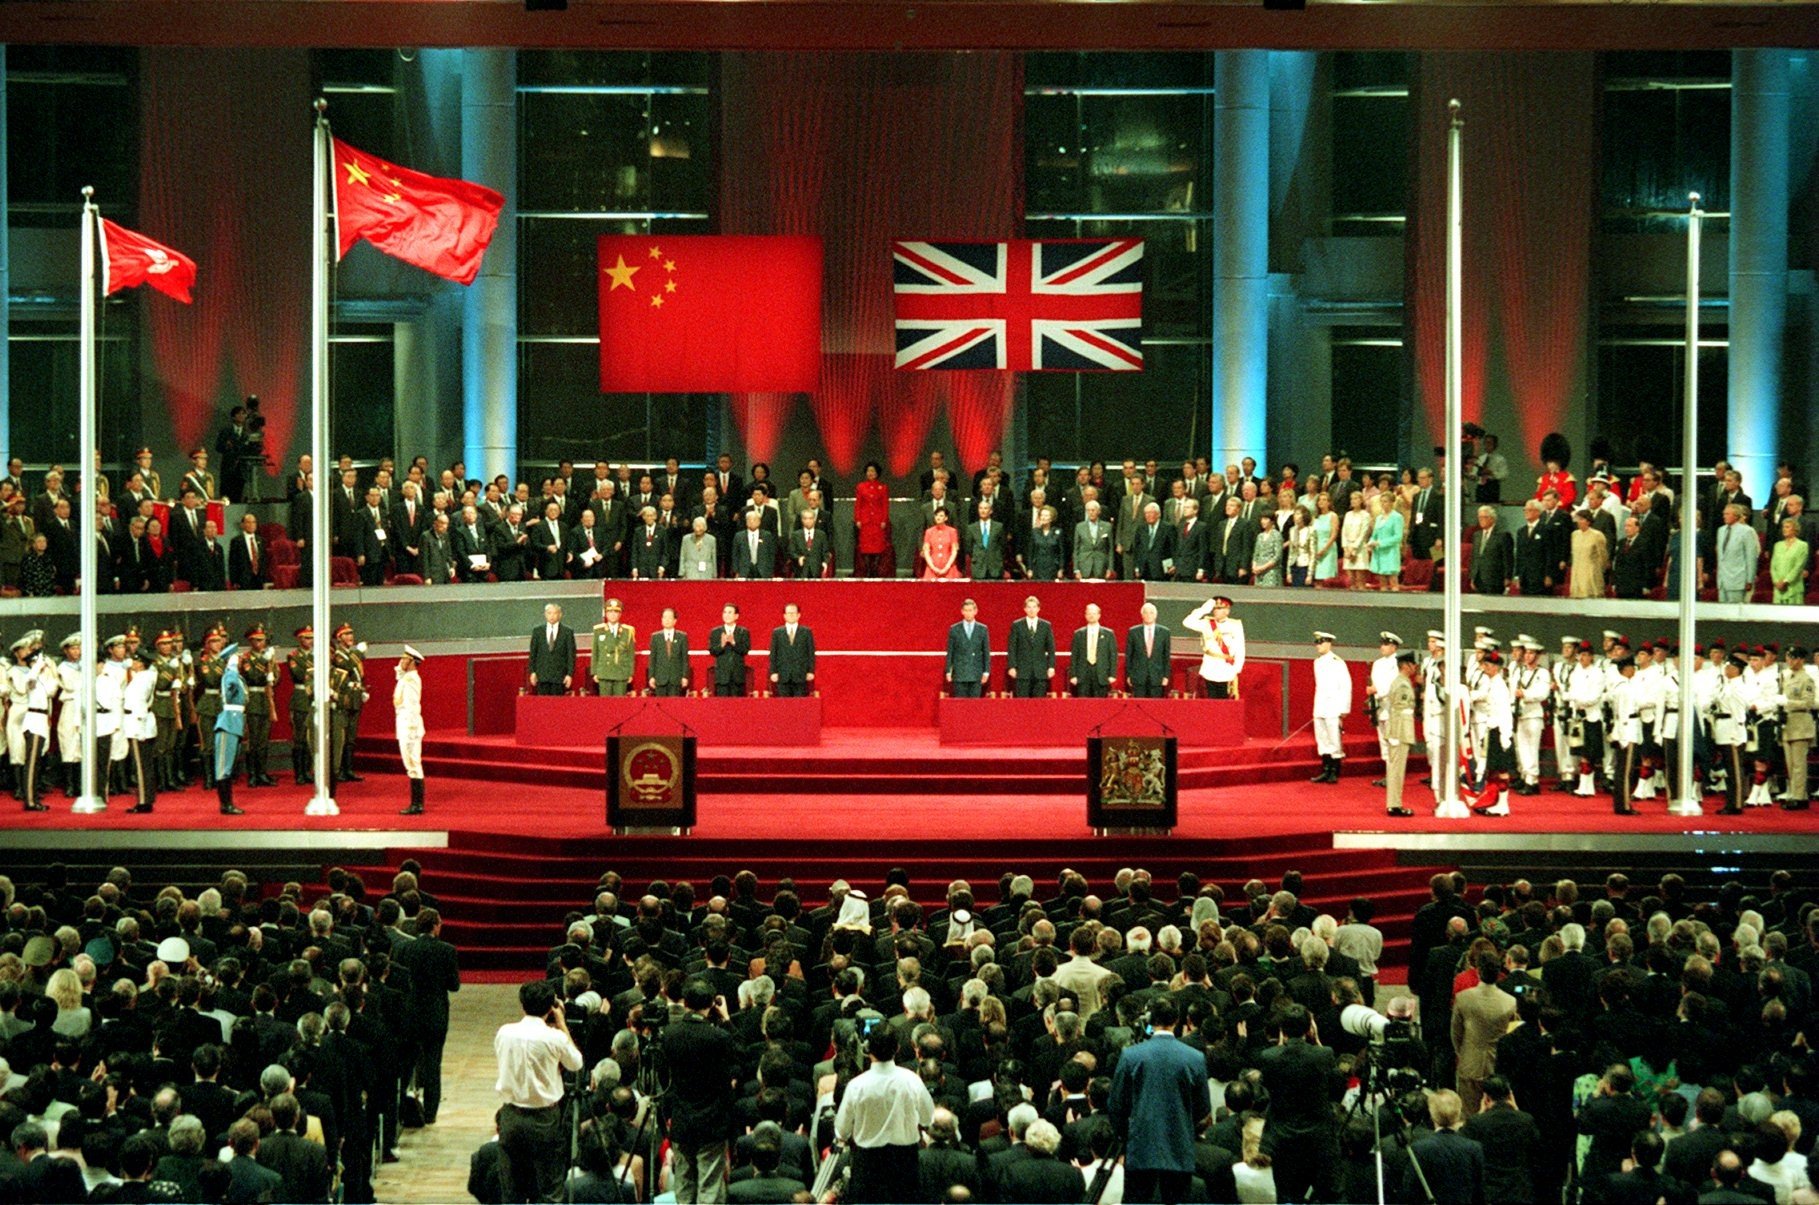 The handover of Hong Kong from British sovereignty to the mainland took place in 1997 at the Hong Kong Convention and Exhibition Centre. Photo: Robert Ng